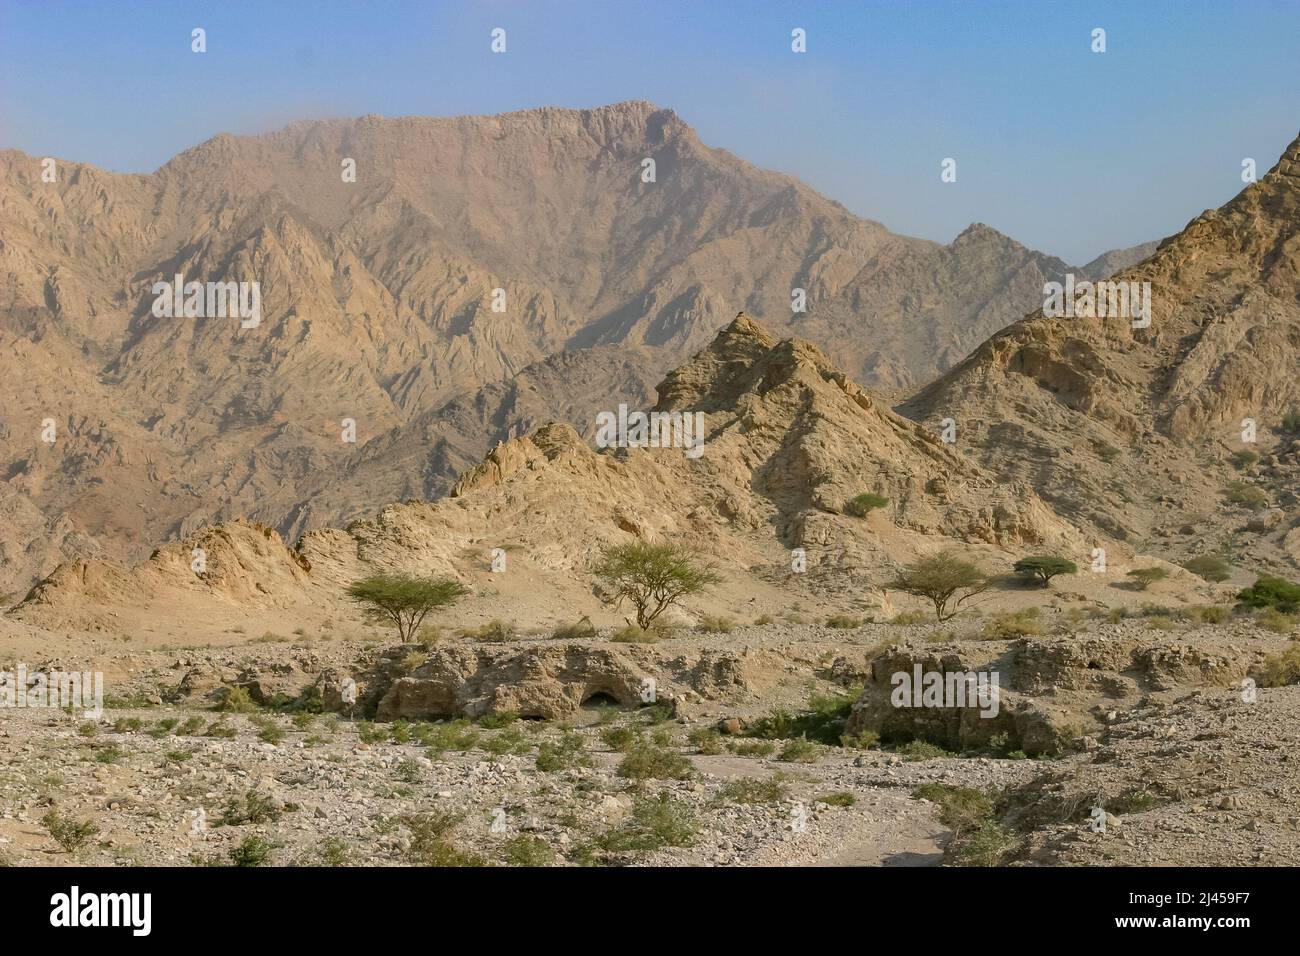 A wadi in the desert near the city of Ras al Khaimah in the United Arab Emirates. The Hajar Mountains are in the background. Stock Photo